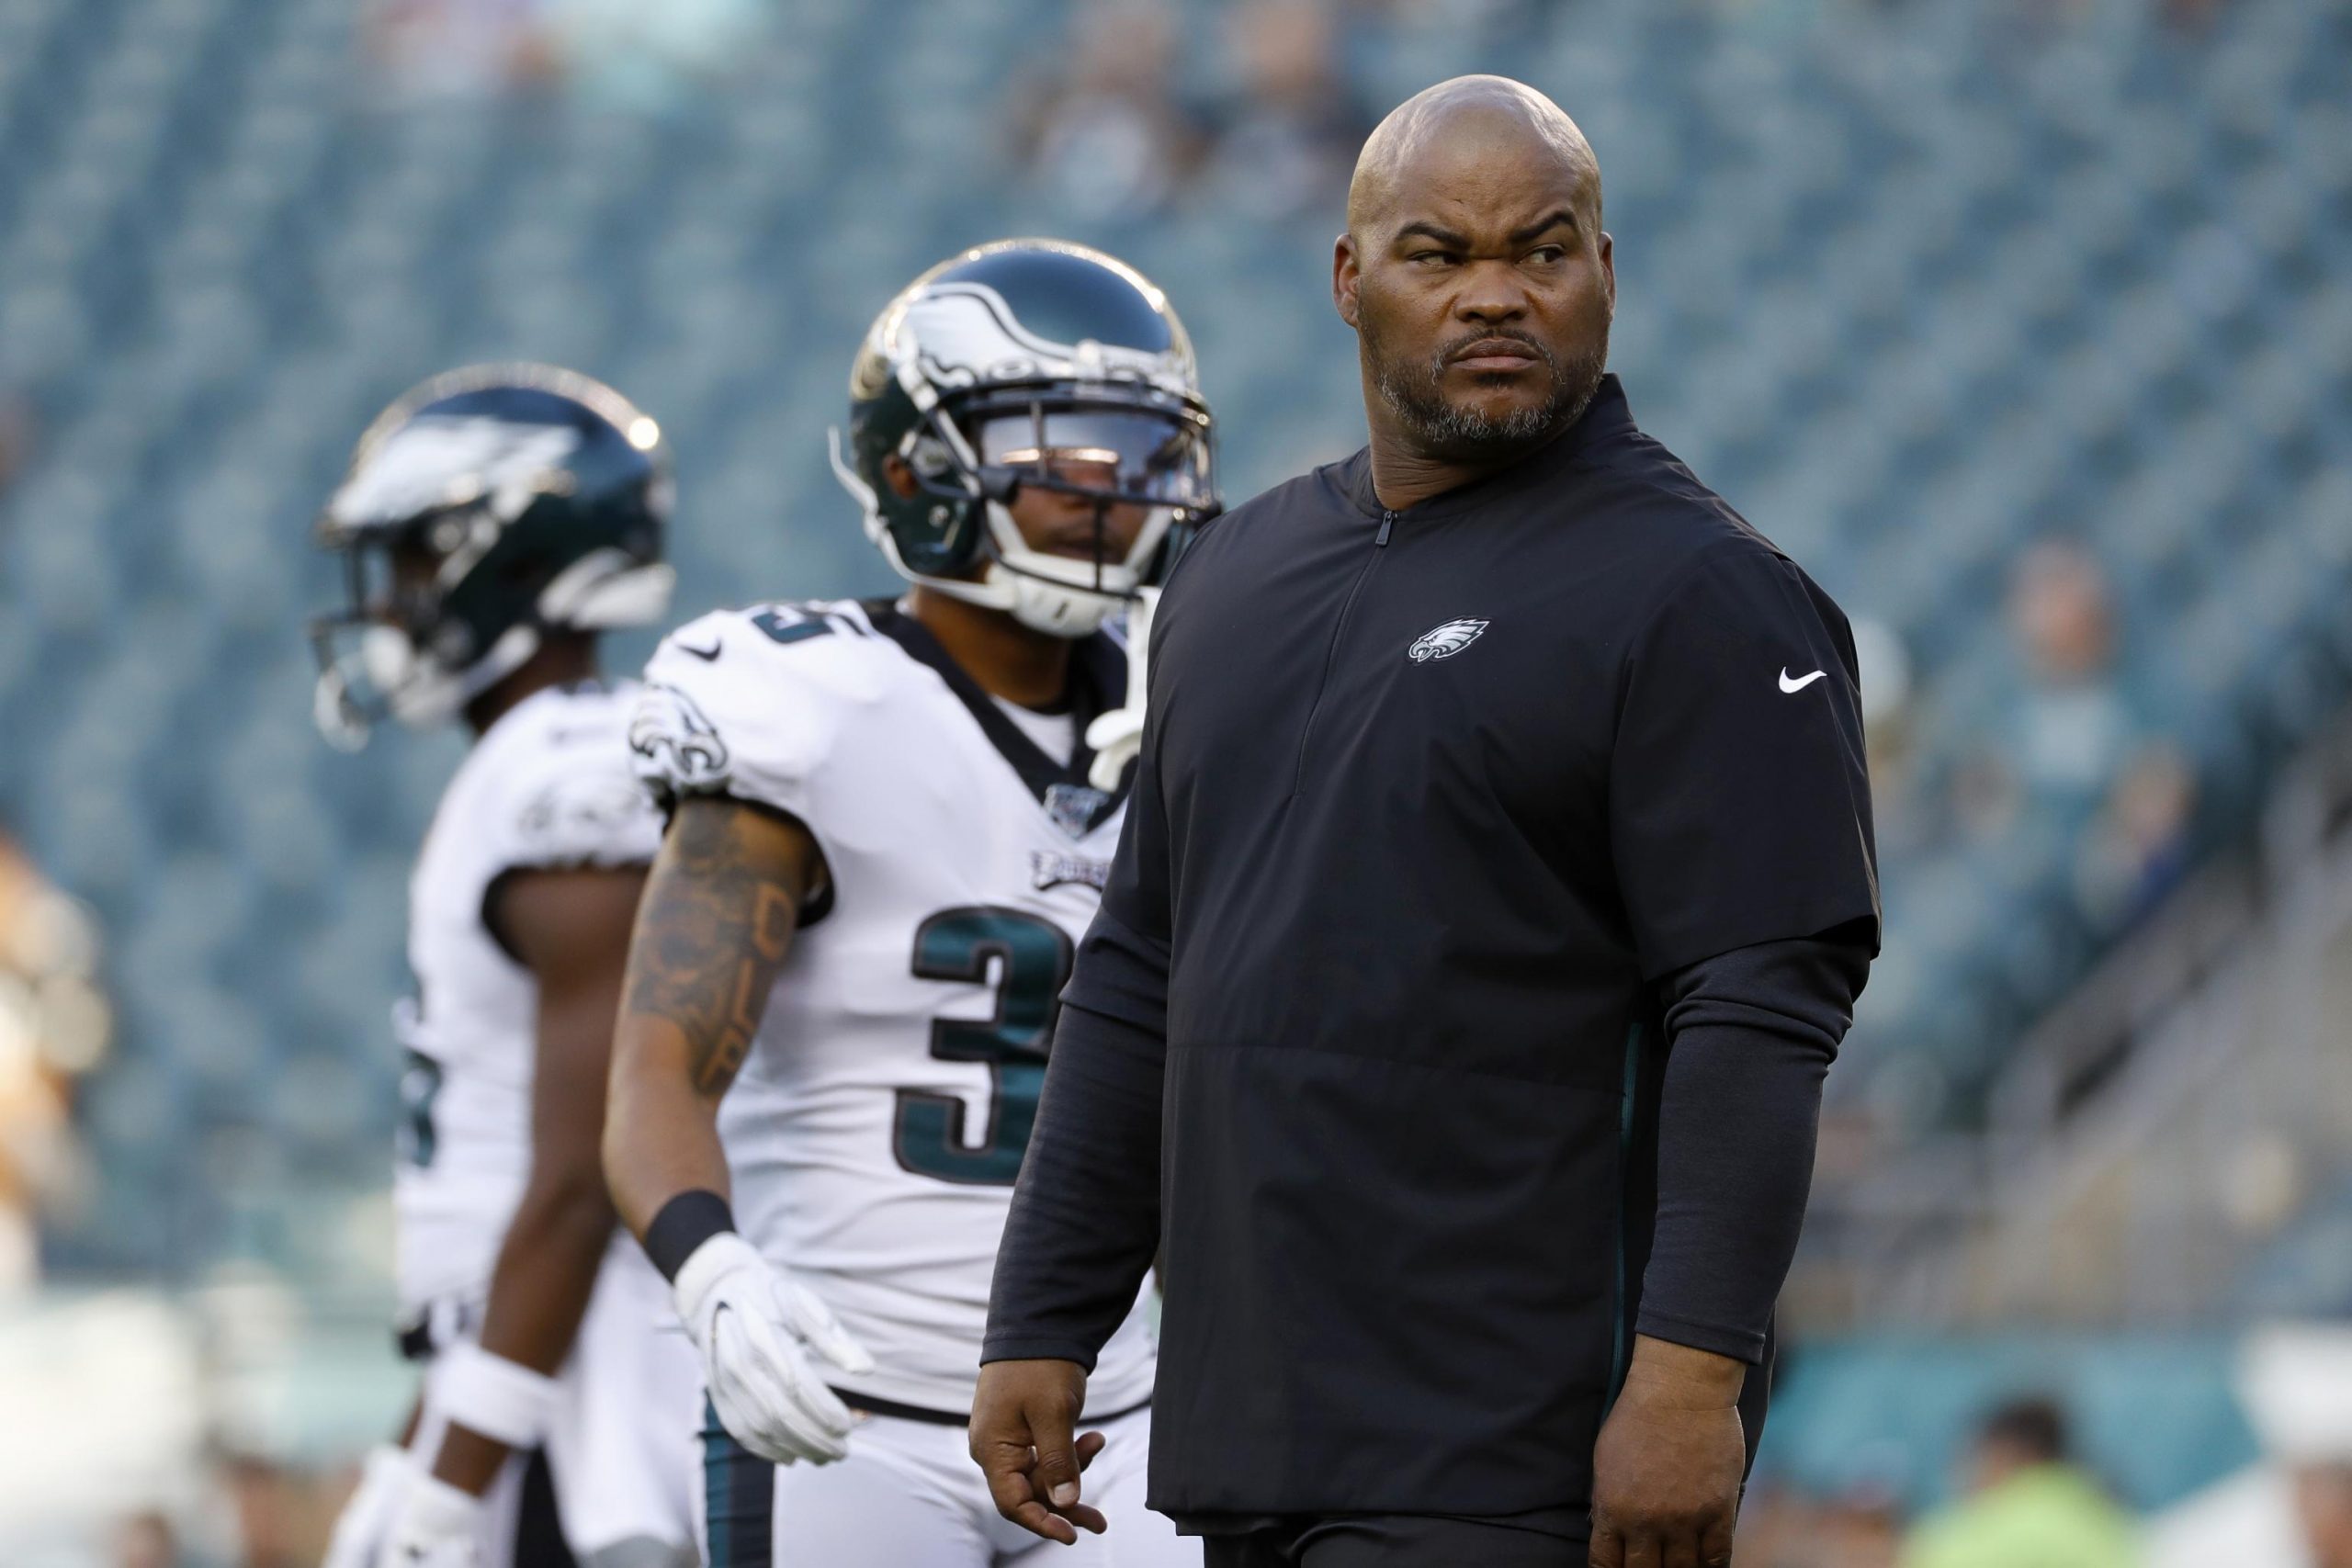 Duce Staley working as a coach